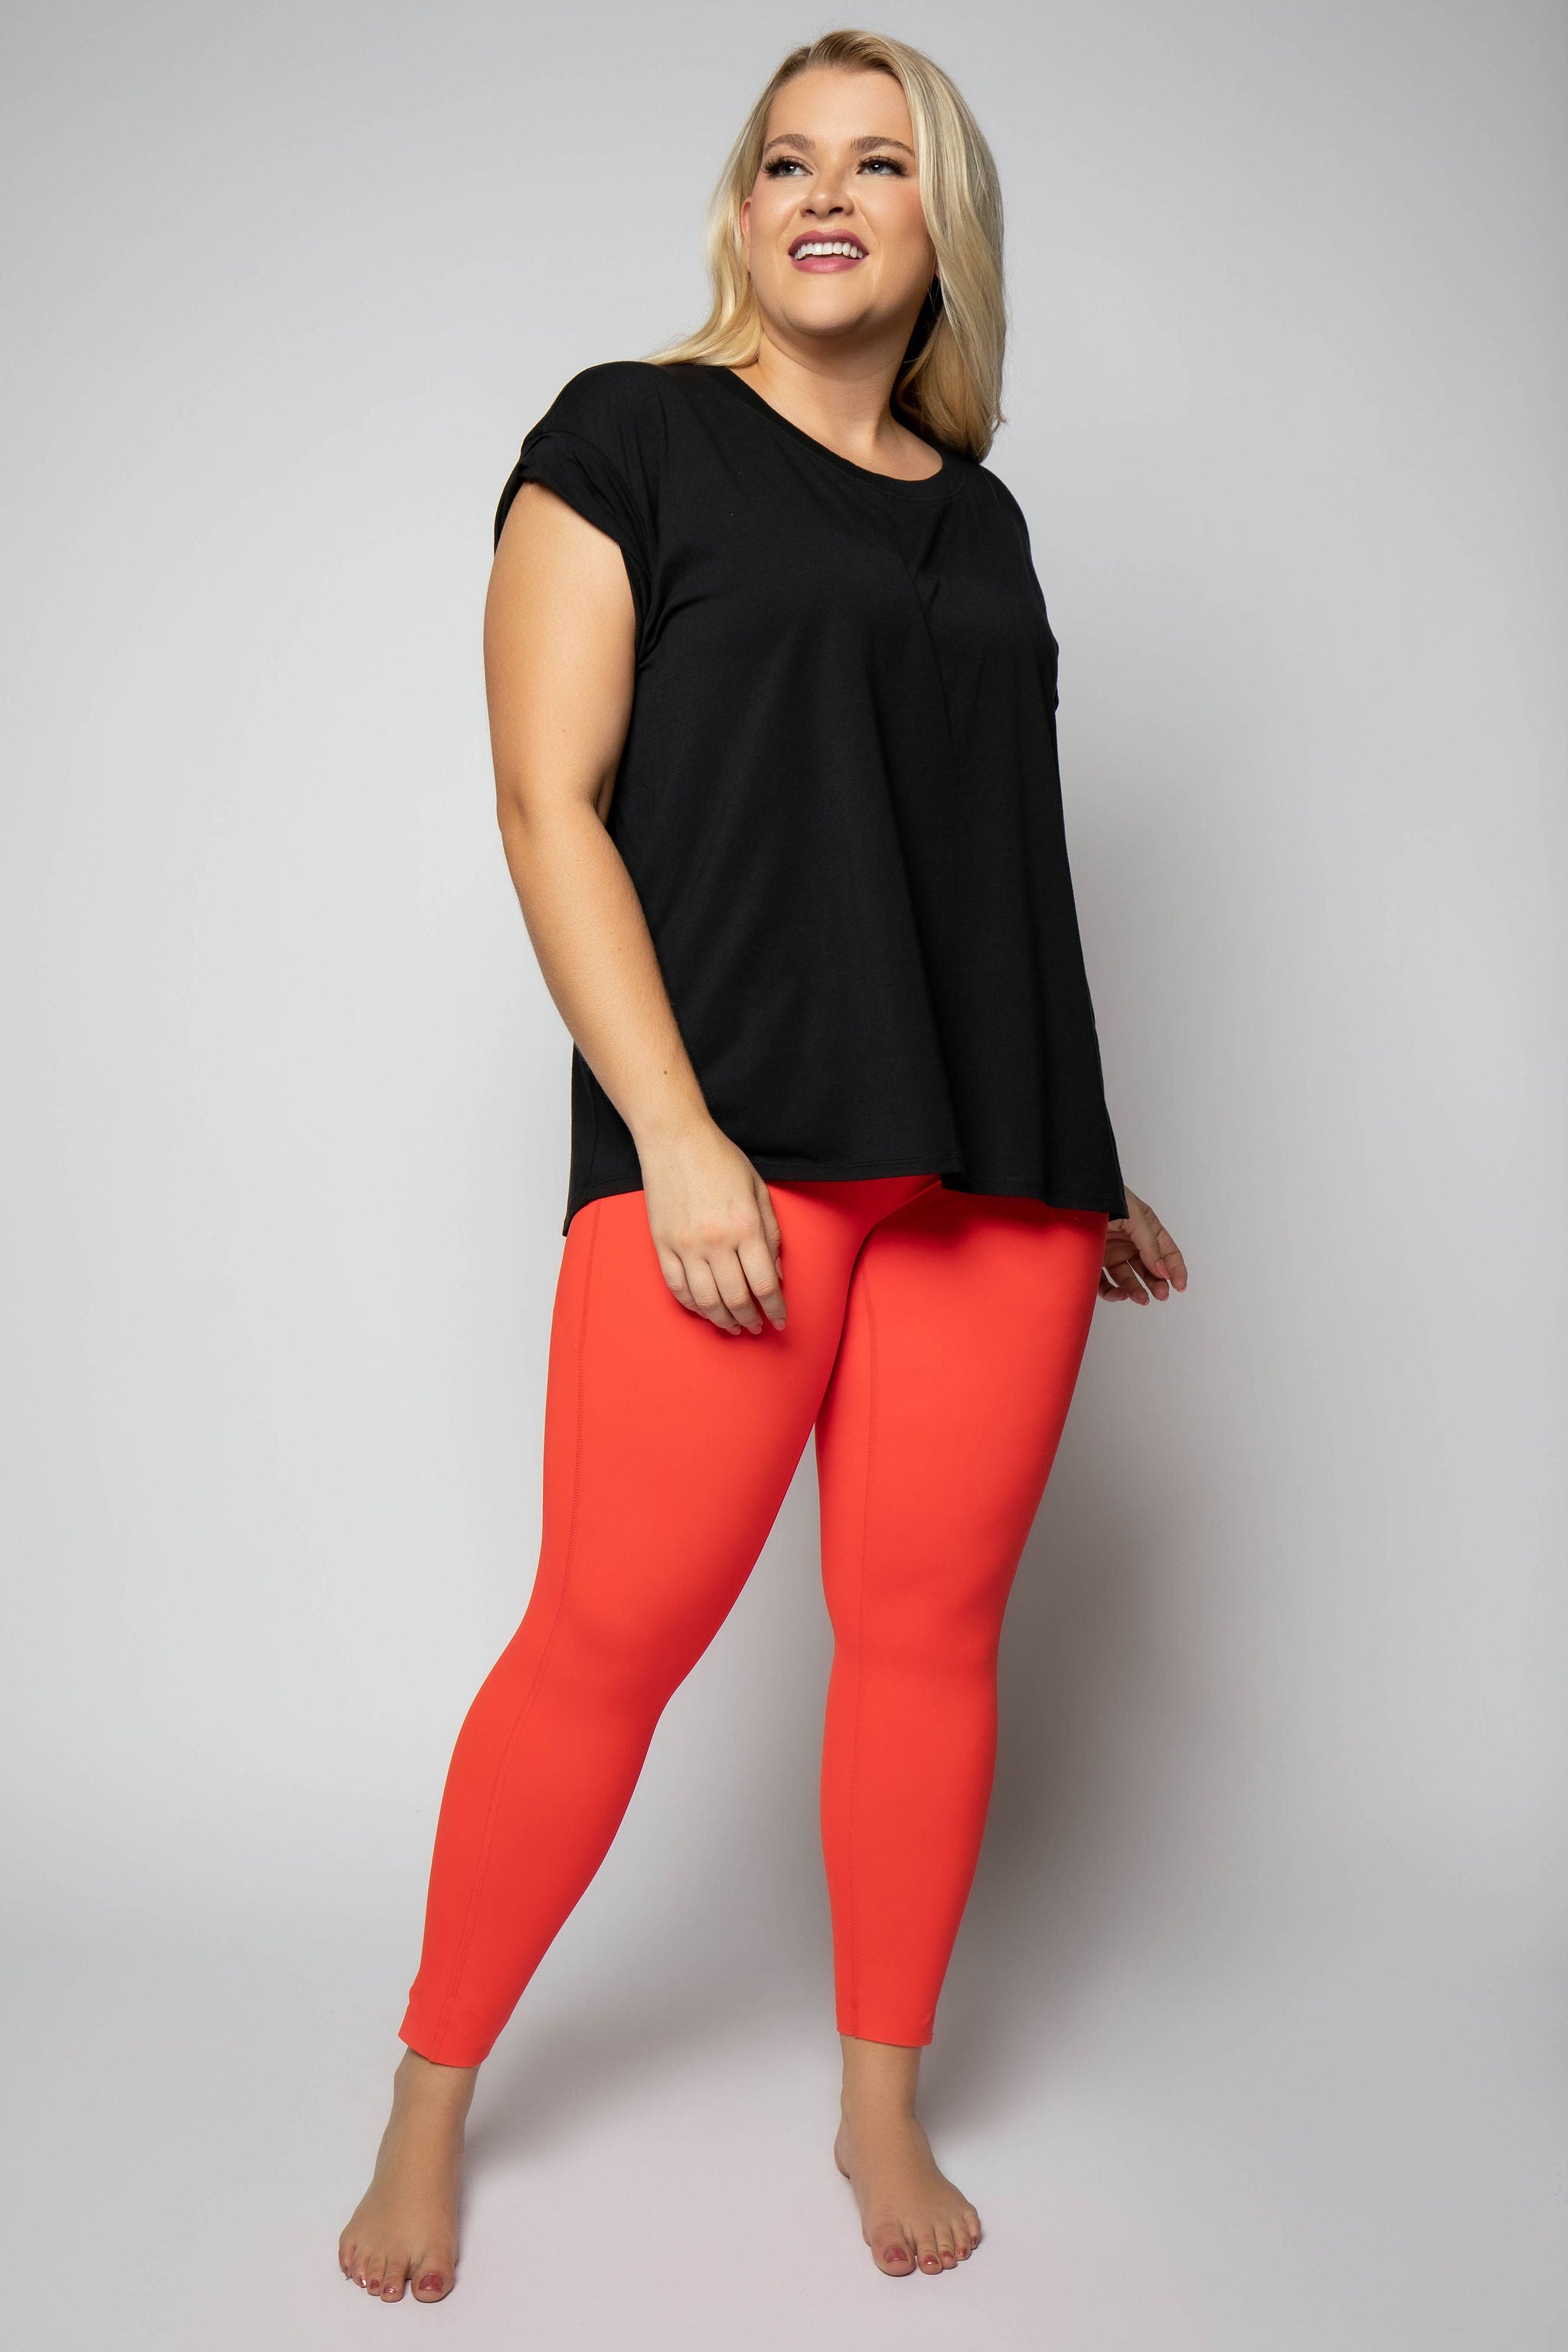 LASER-CUT AND BONDED ESSENTIAL FOLDOVER HIGH WAISTED LEGGINGS - AMOUR781